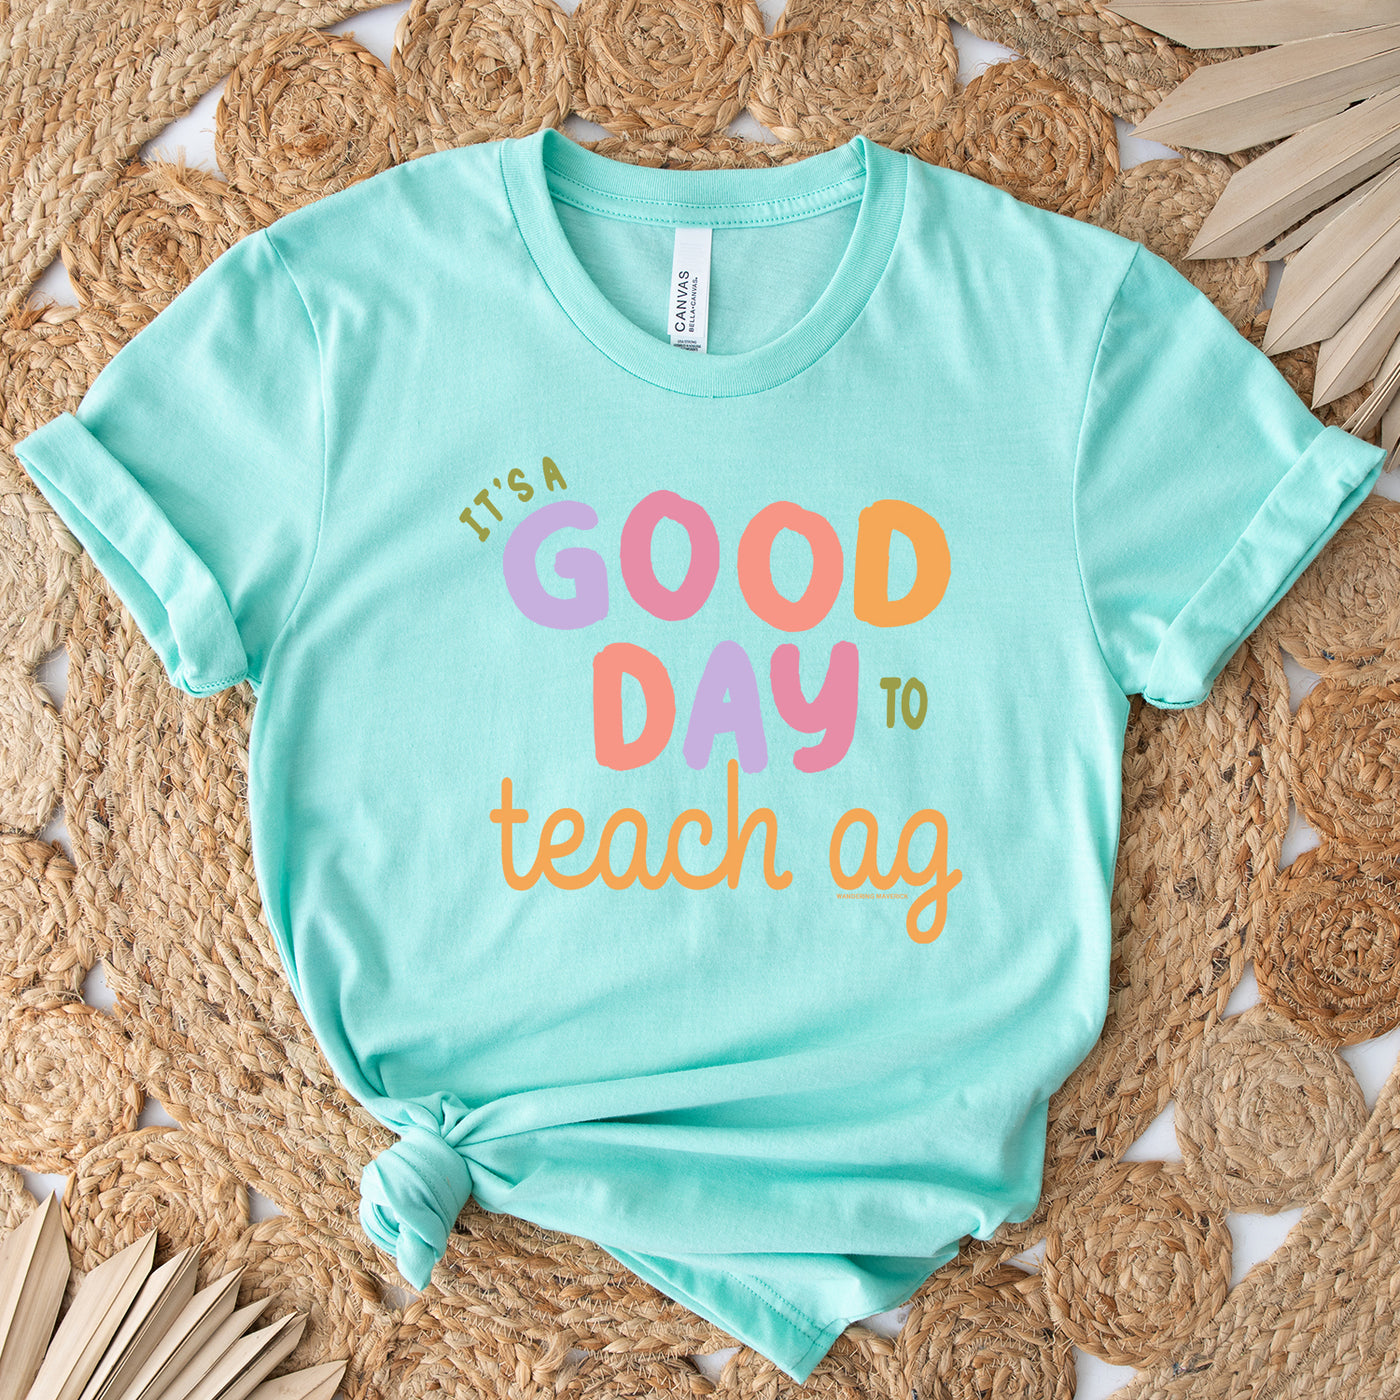 It's A Good Day To Teach Ag T-Shirt (XS-4XL) - Multiple Colors!